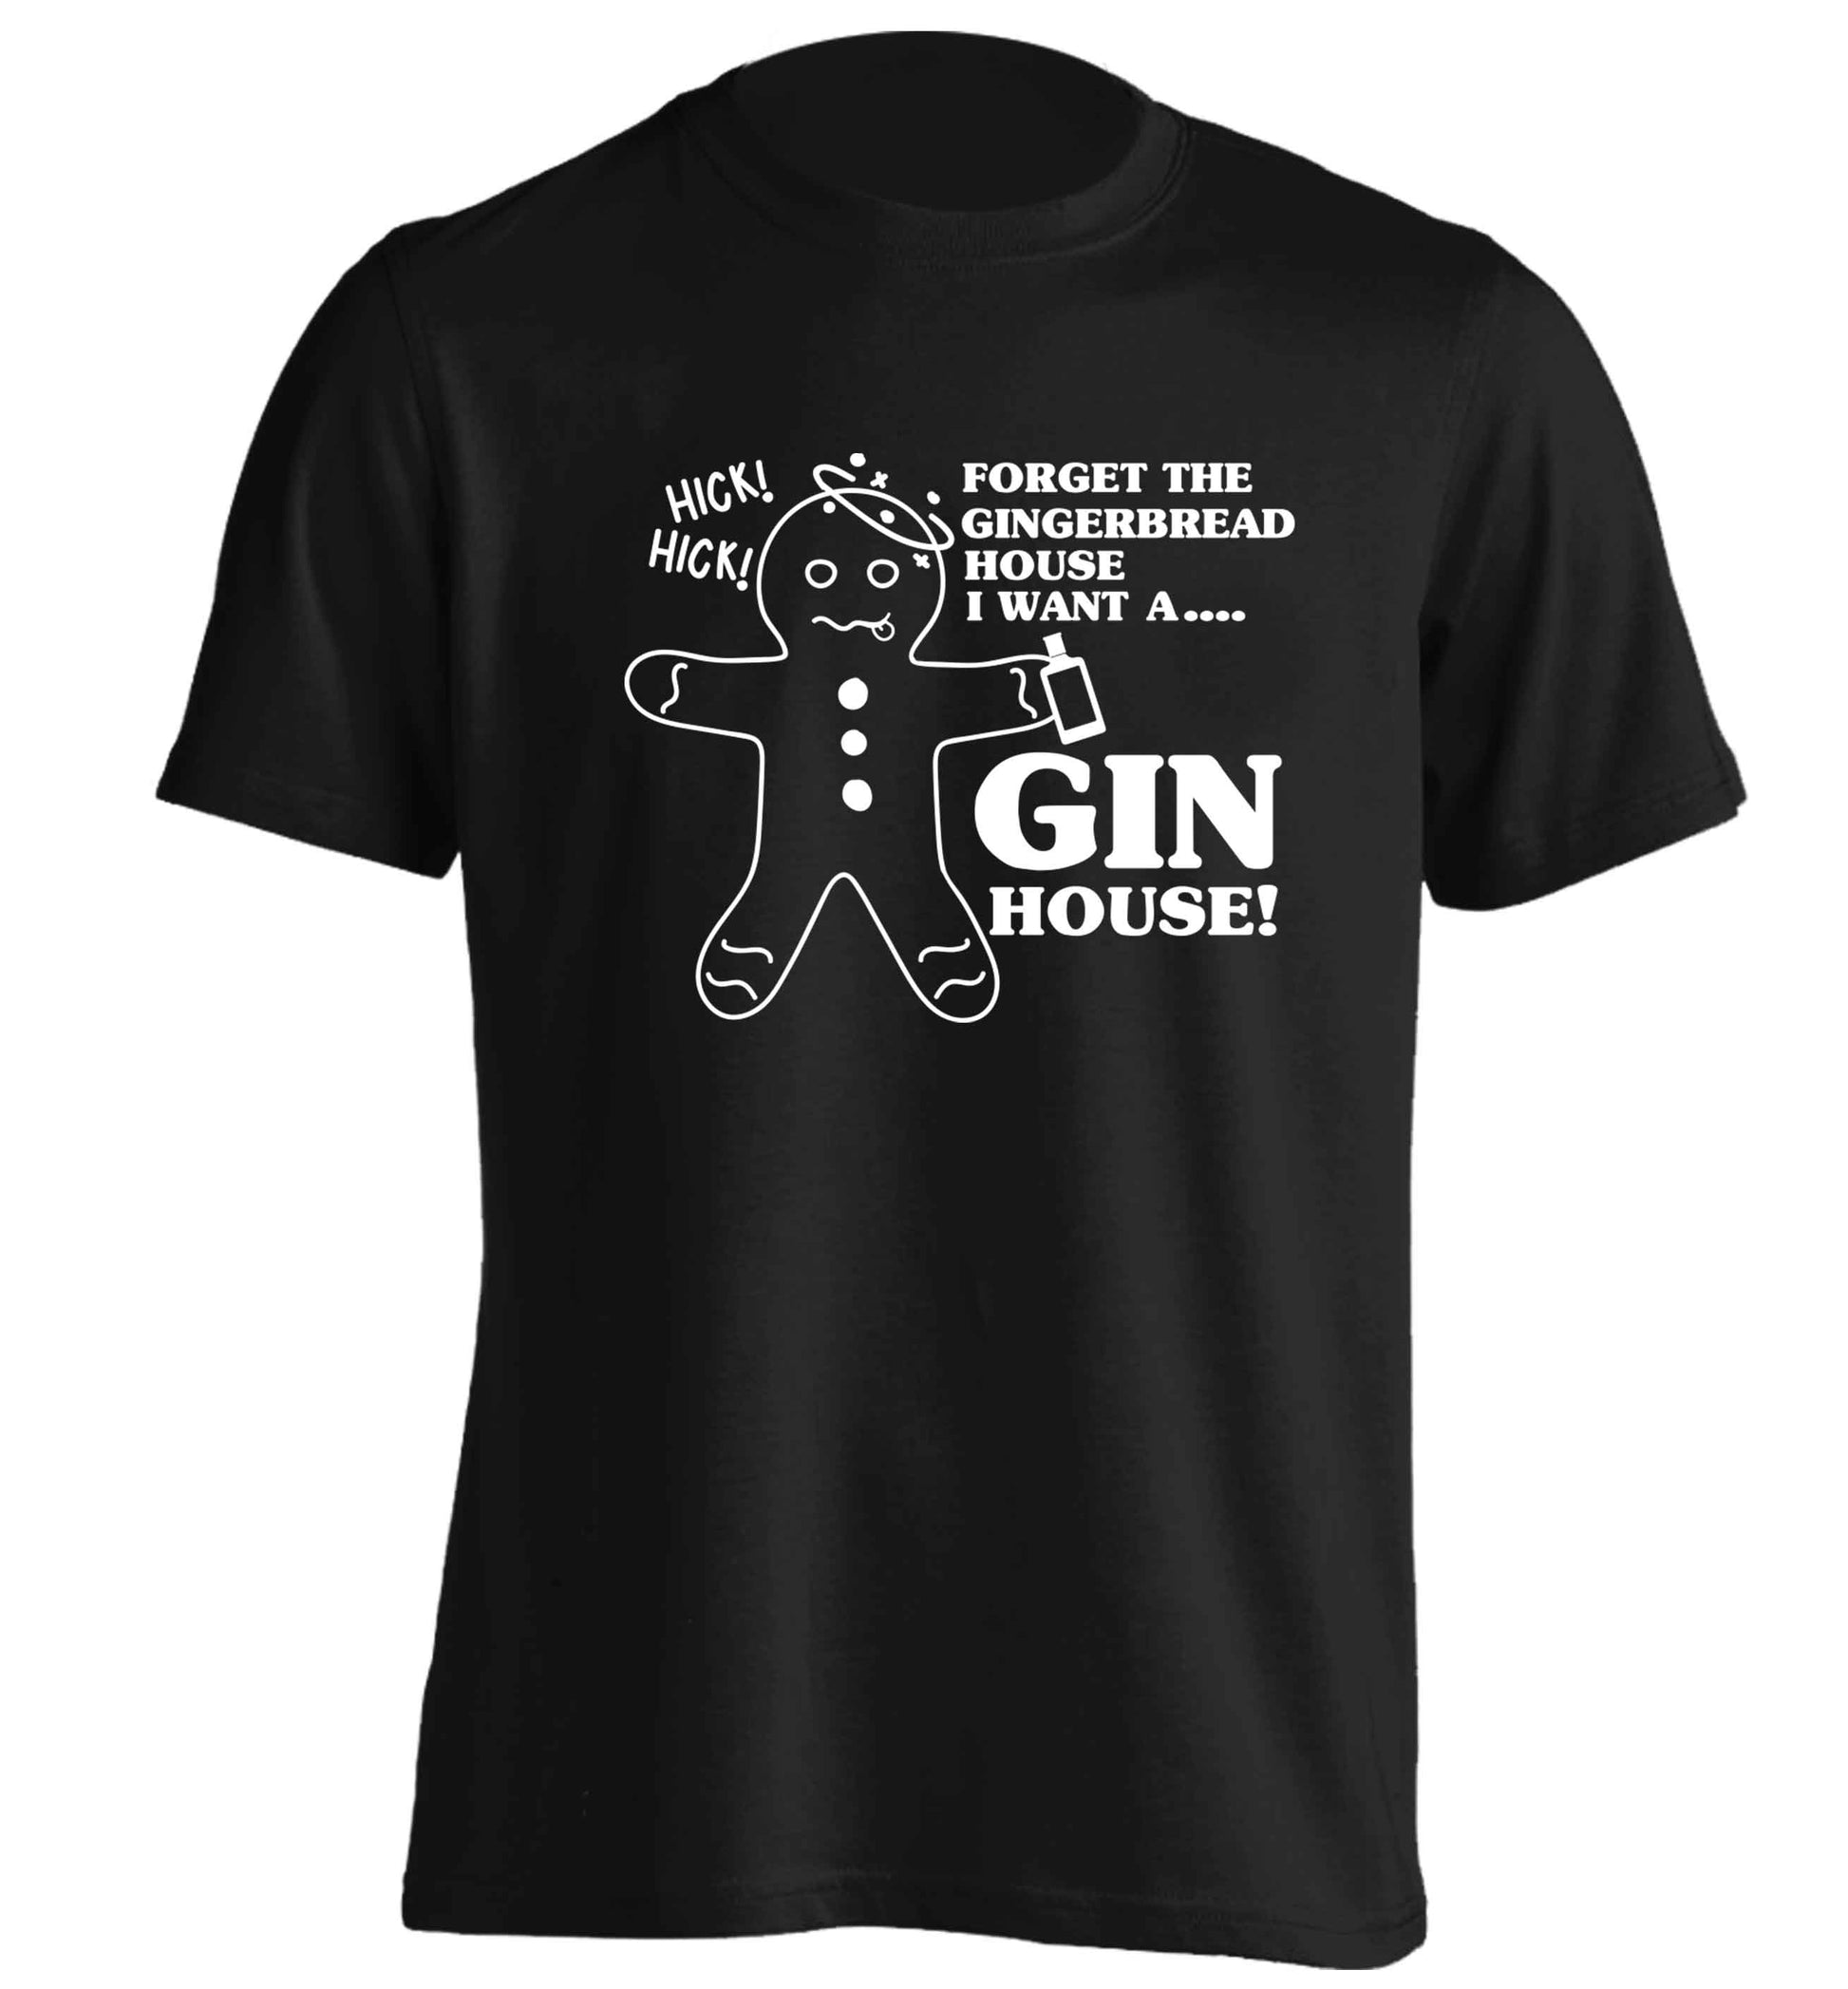 Forget the gingerbread house I want a gin house adults unisex black Tshirt 2XL